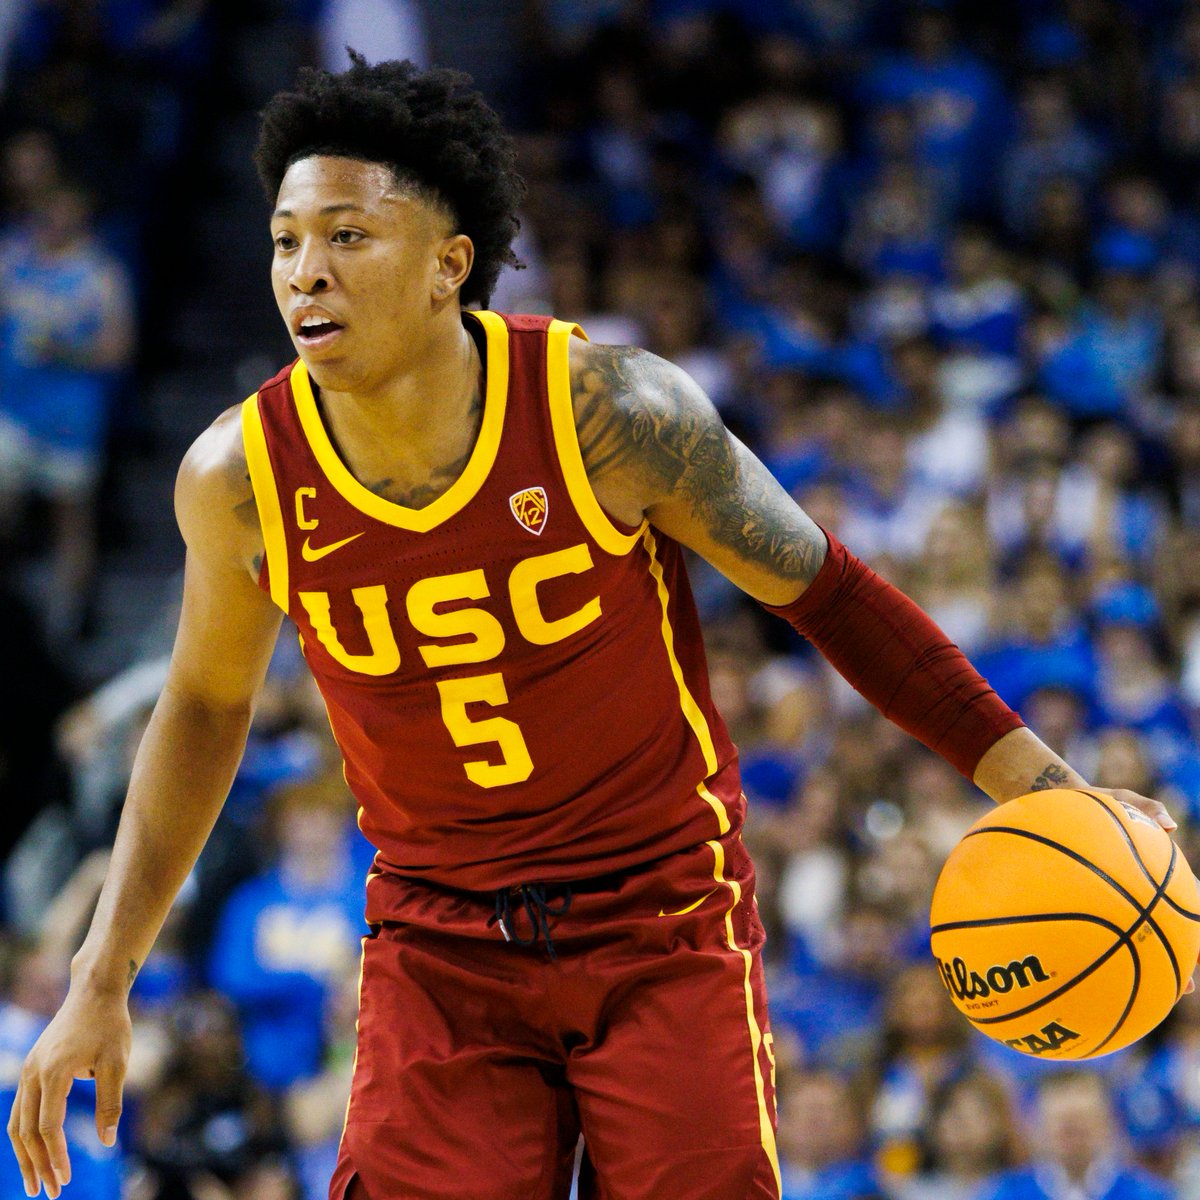 NEWS: USC guard Boogie Ellis has been invited to the G League Elite Camp, a source told ESPN. A two-time All-Pac-12 player, Ellis scored over 2000 points in his college career.